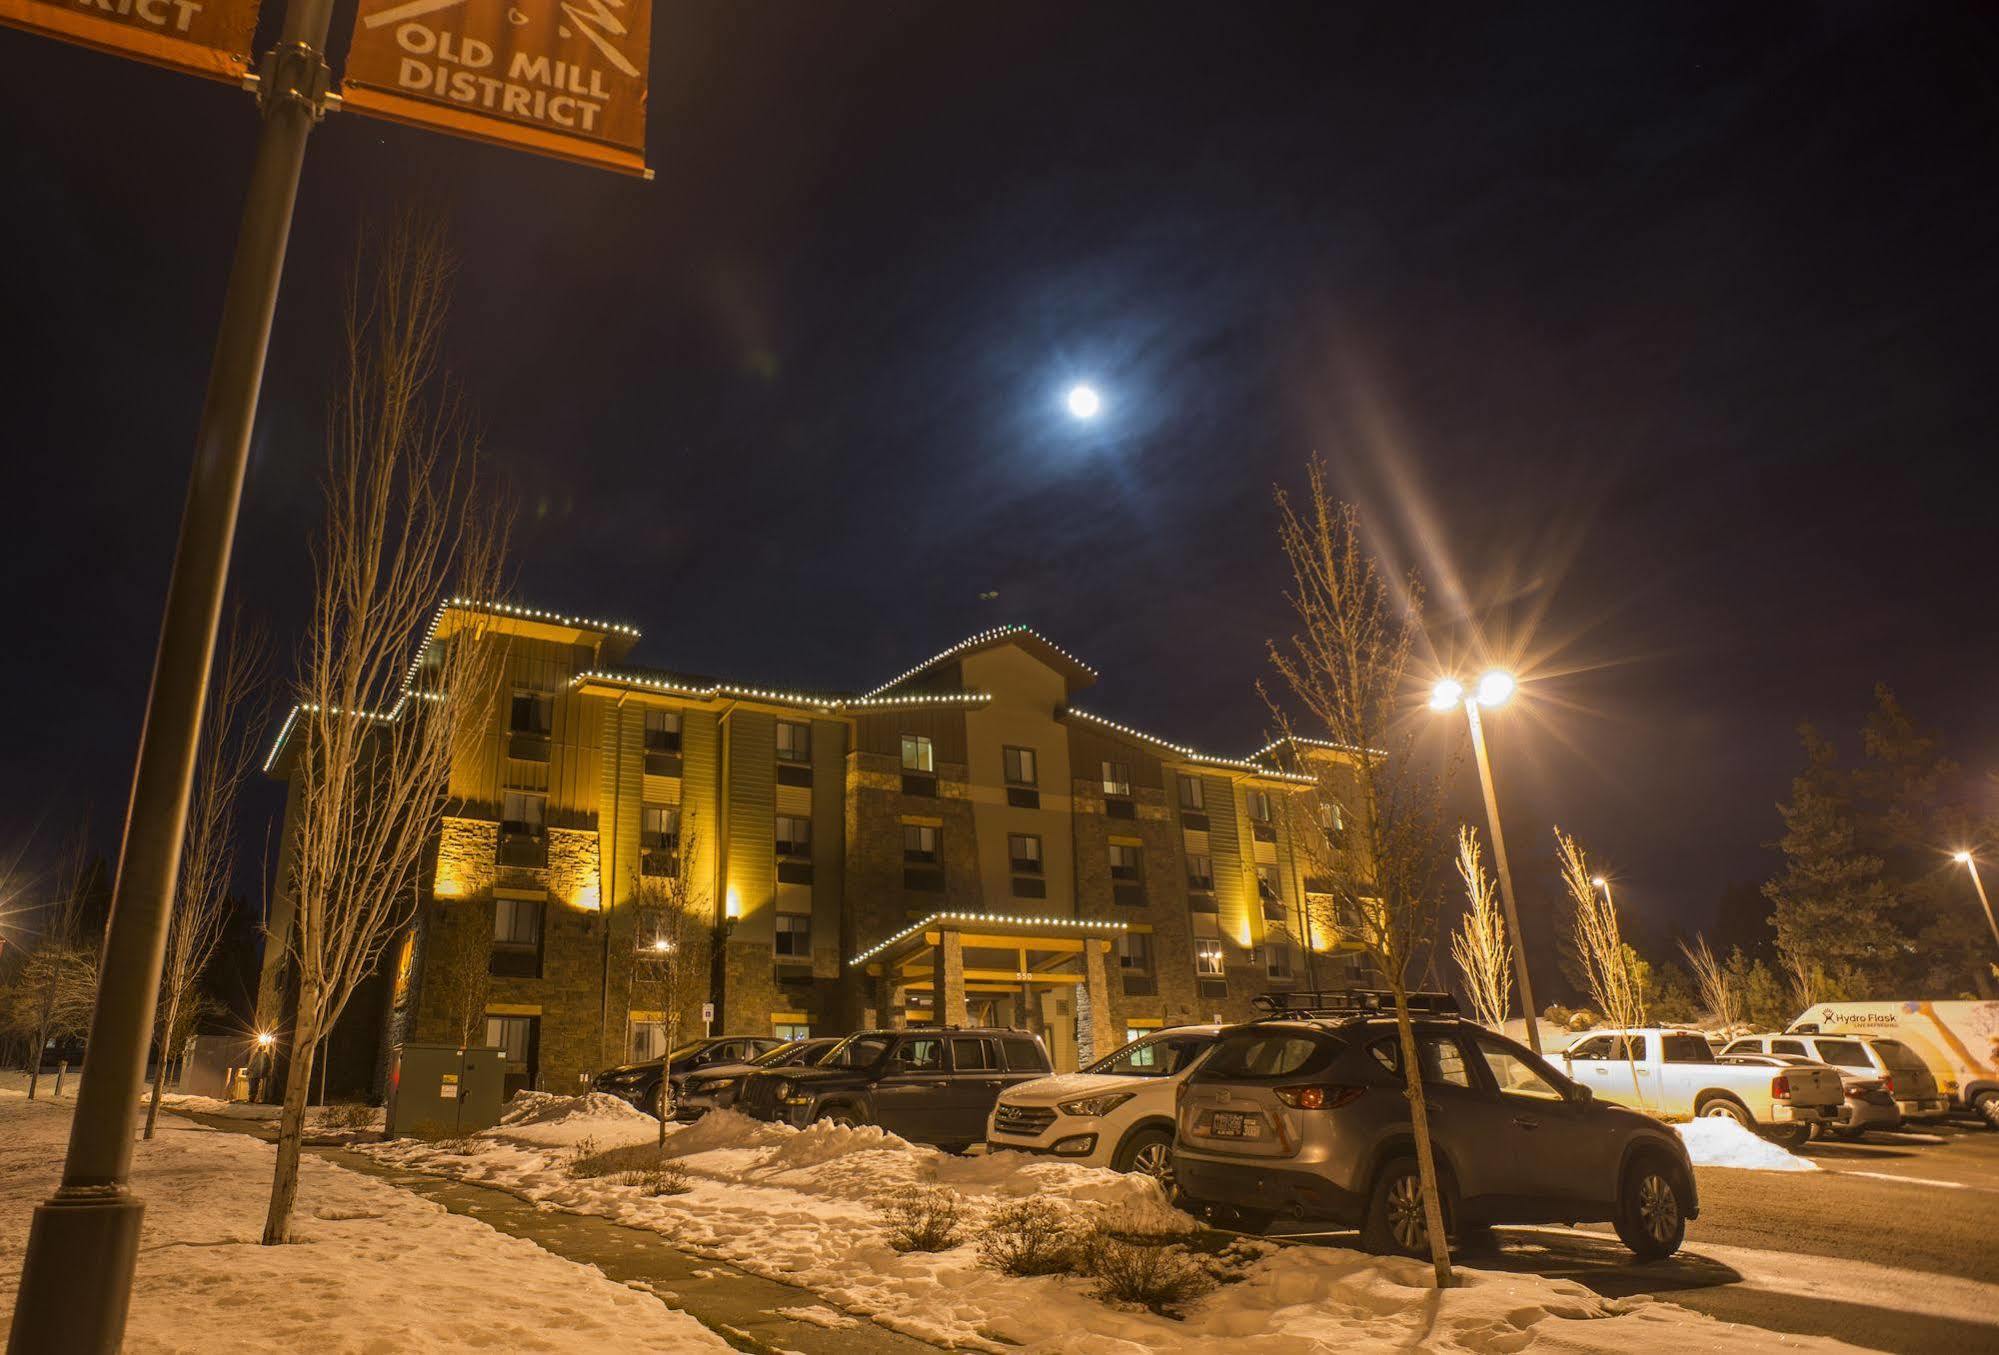 My Place Hotel-Bend, Or Exterior photo